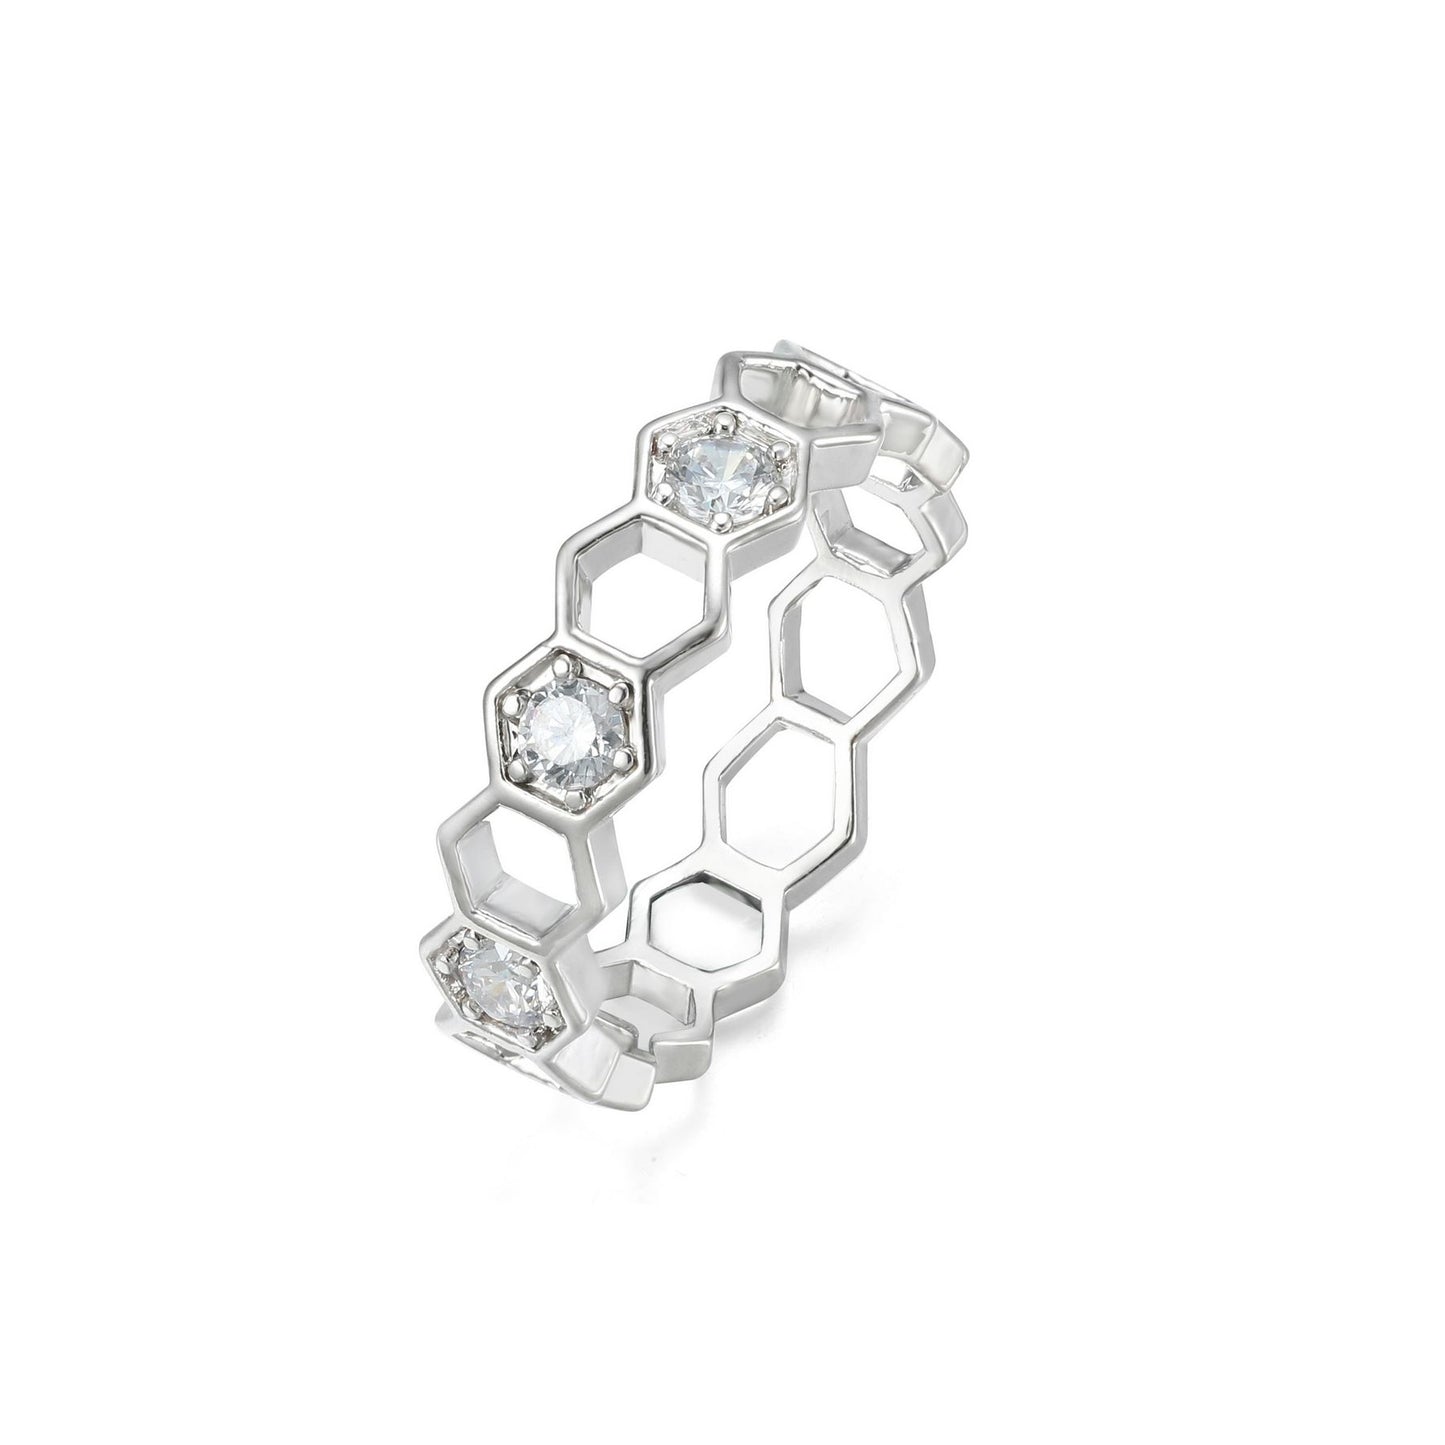 Honey Pot - Chunky Hexagon Band set with Cubic Zirconia - from Frinkle